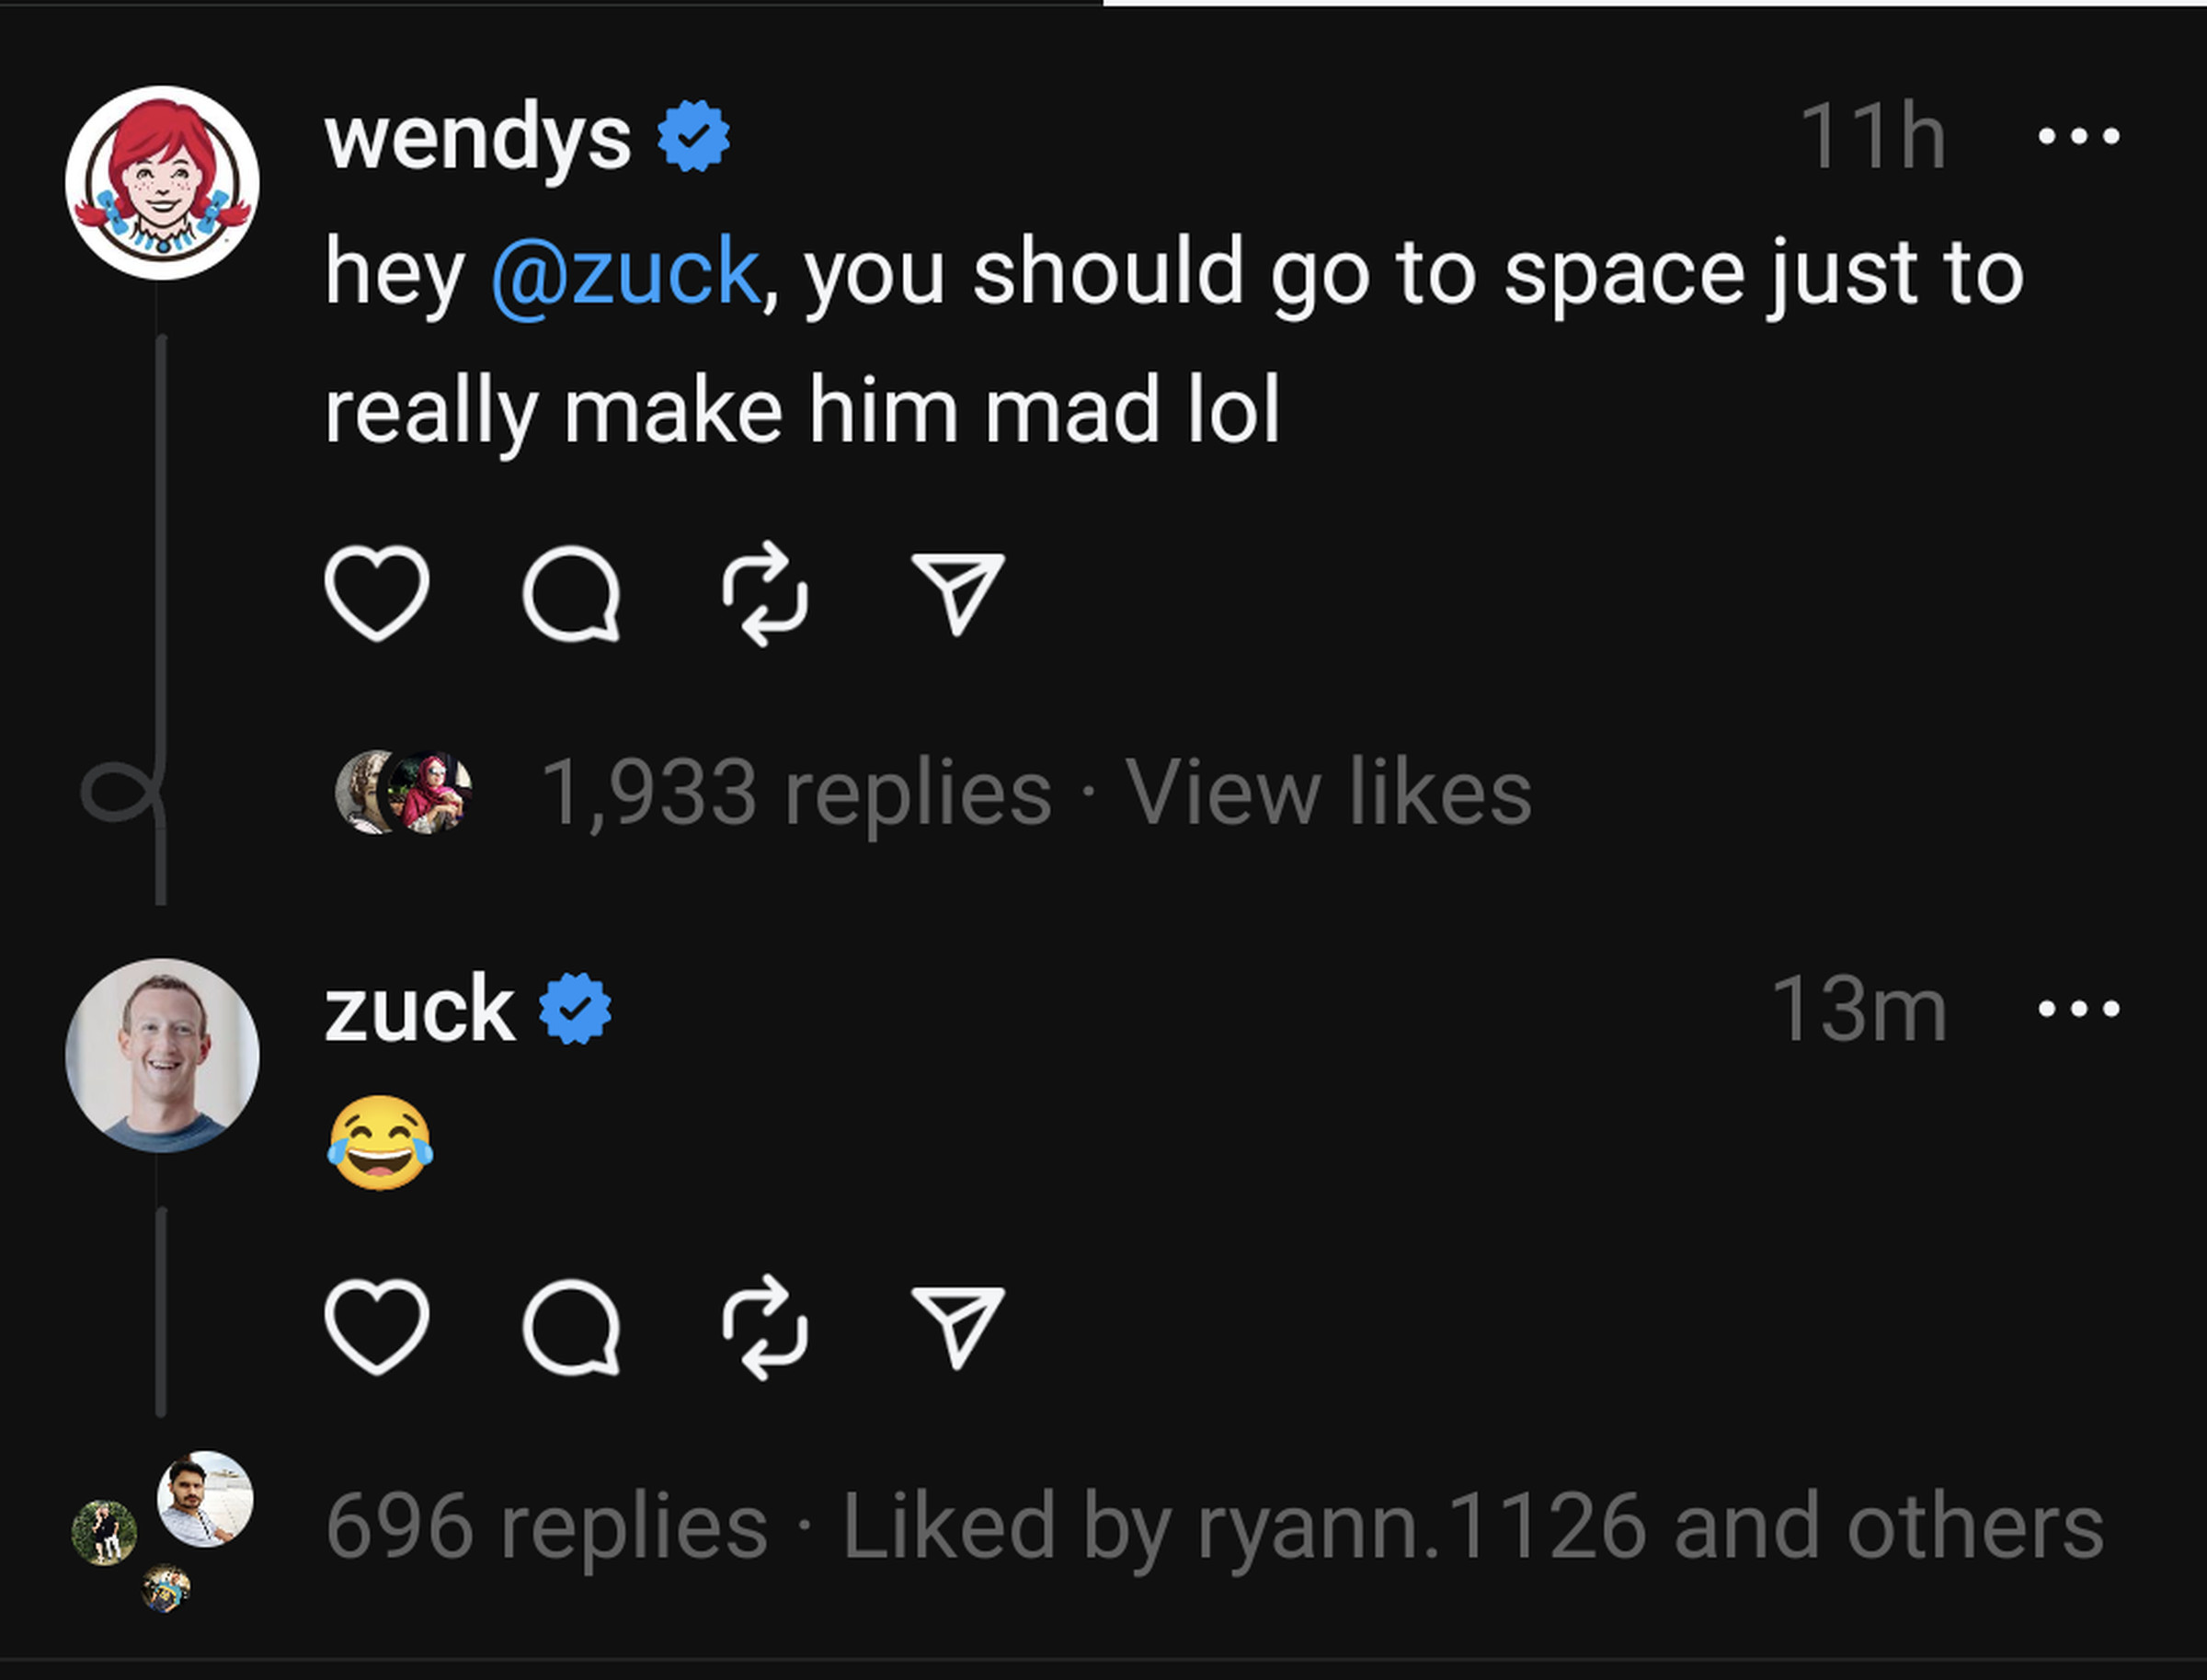 A screenshot of Wendy’s tagging Meta CEO Mark Zuckerberg and saying he should go to space just to make “him” mad. Zuckerberg responds with a laughing emoji.